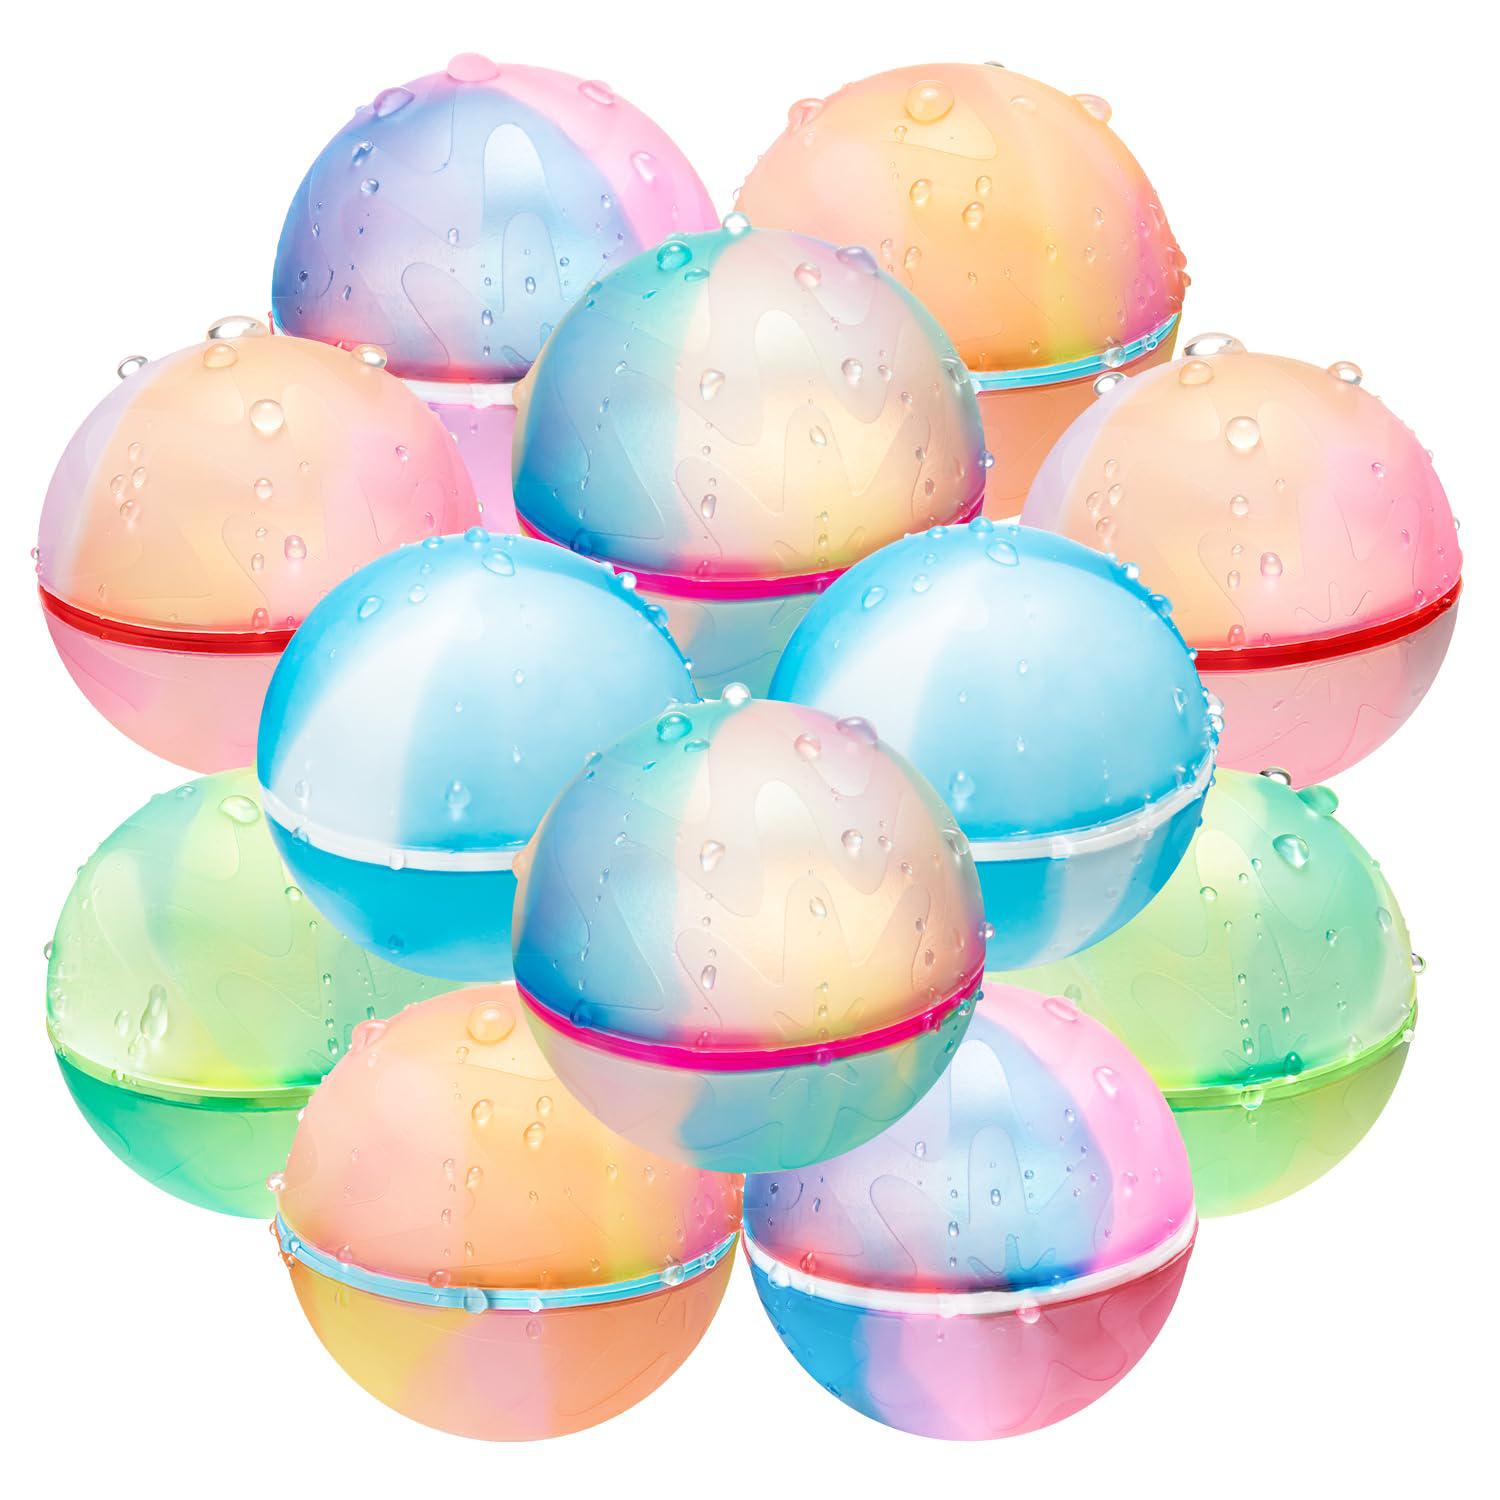 Rapean 12pcs reusable water balloons for kids magnetic self sealing quick fill water balloons, summer water toys refillable water bo